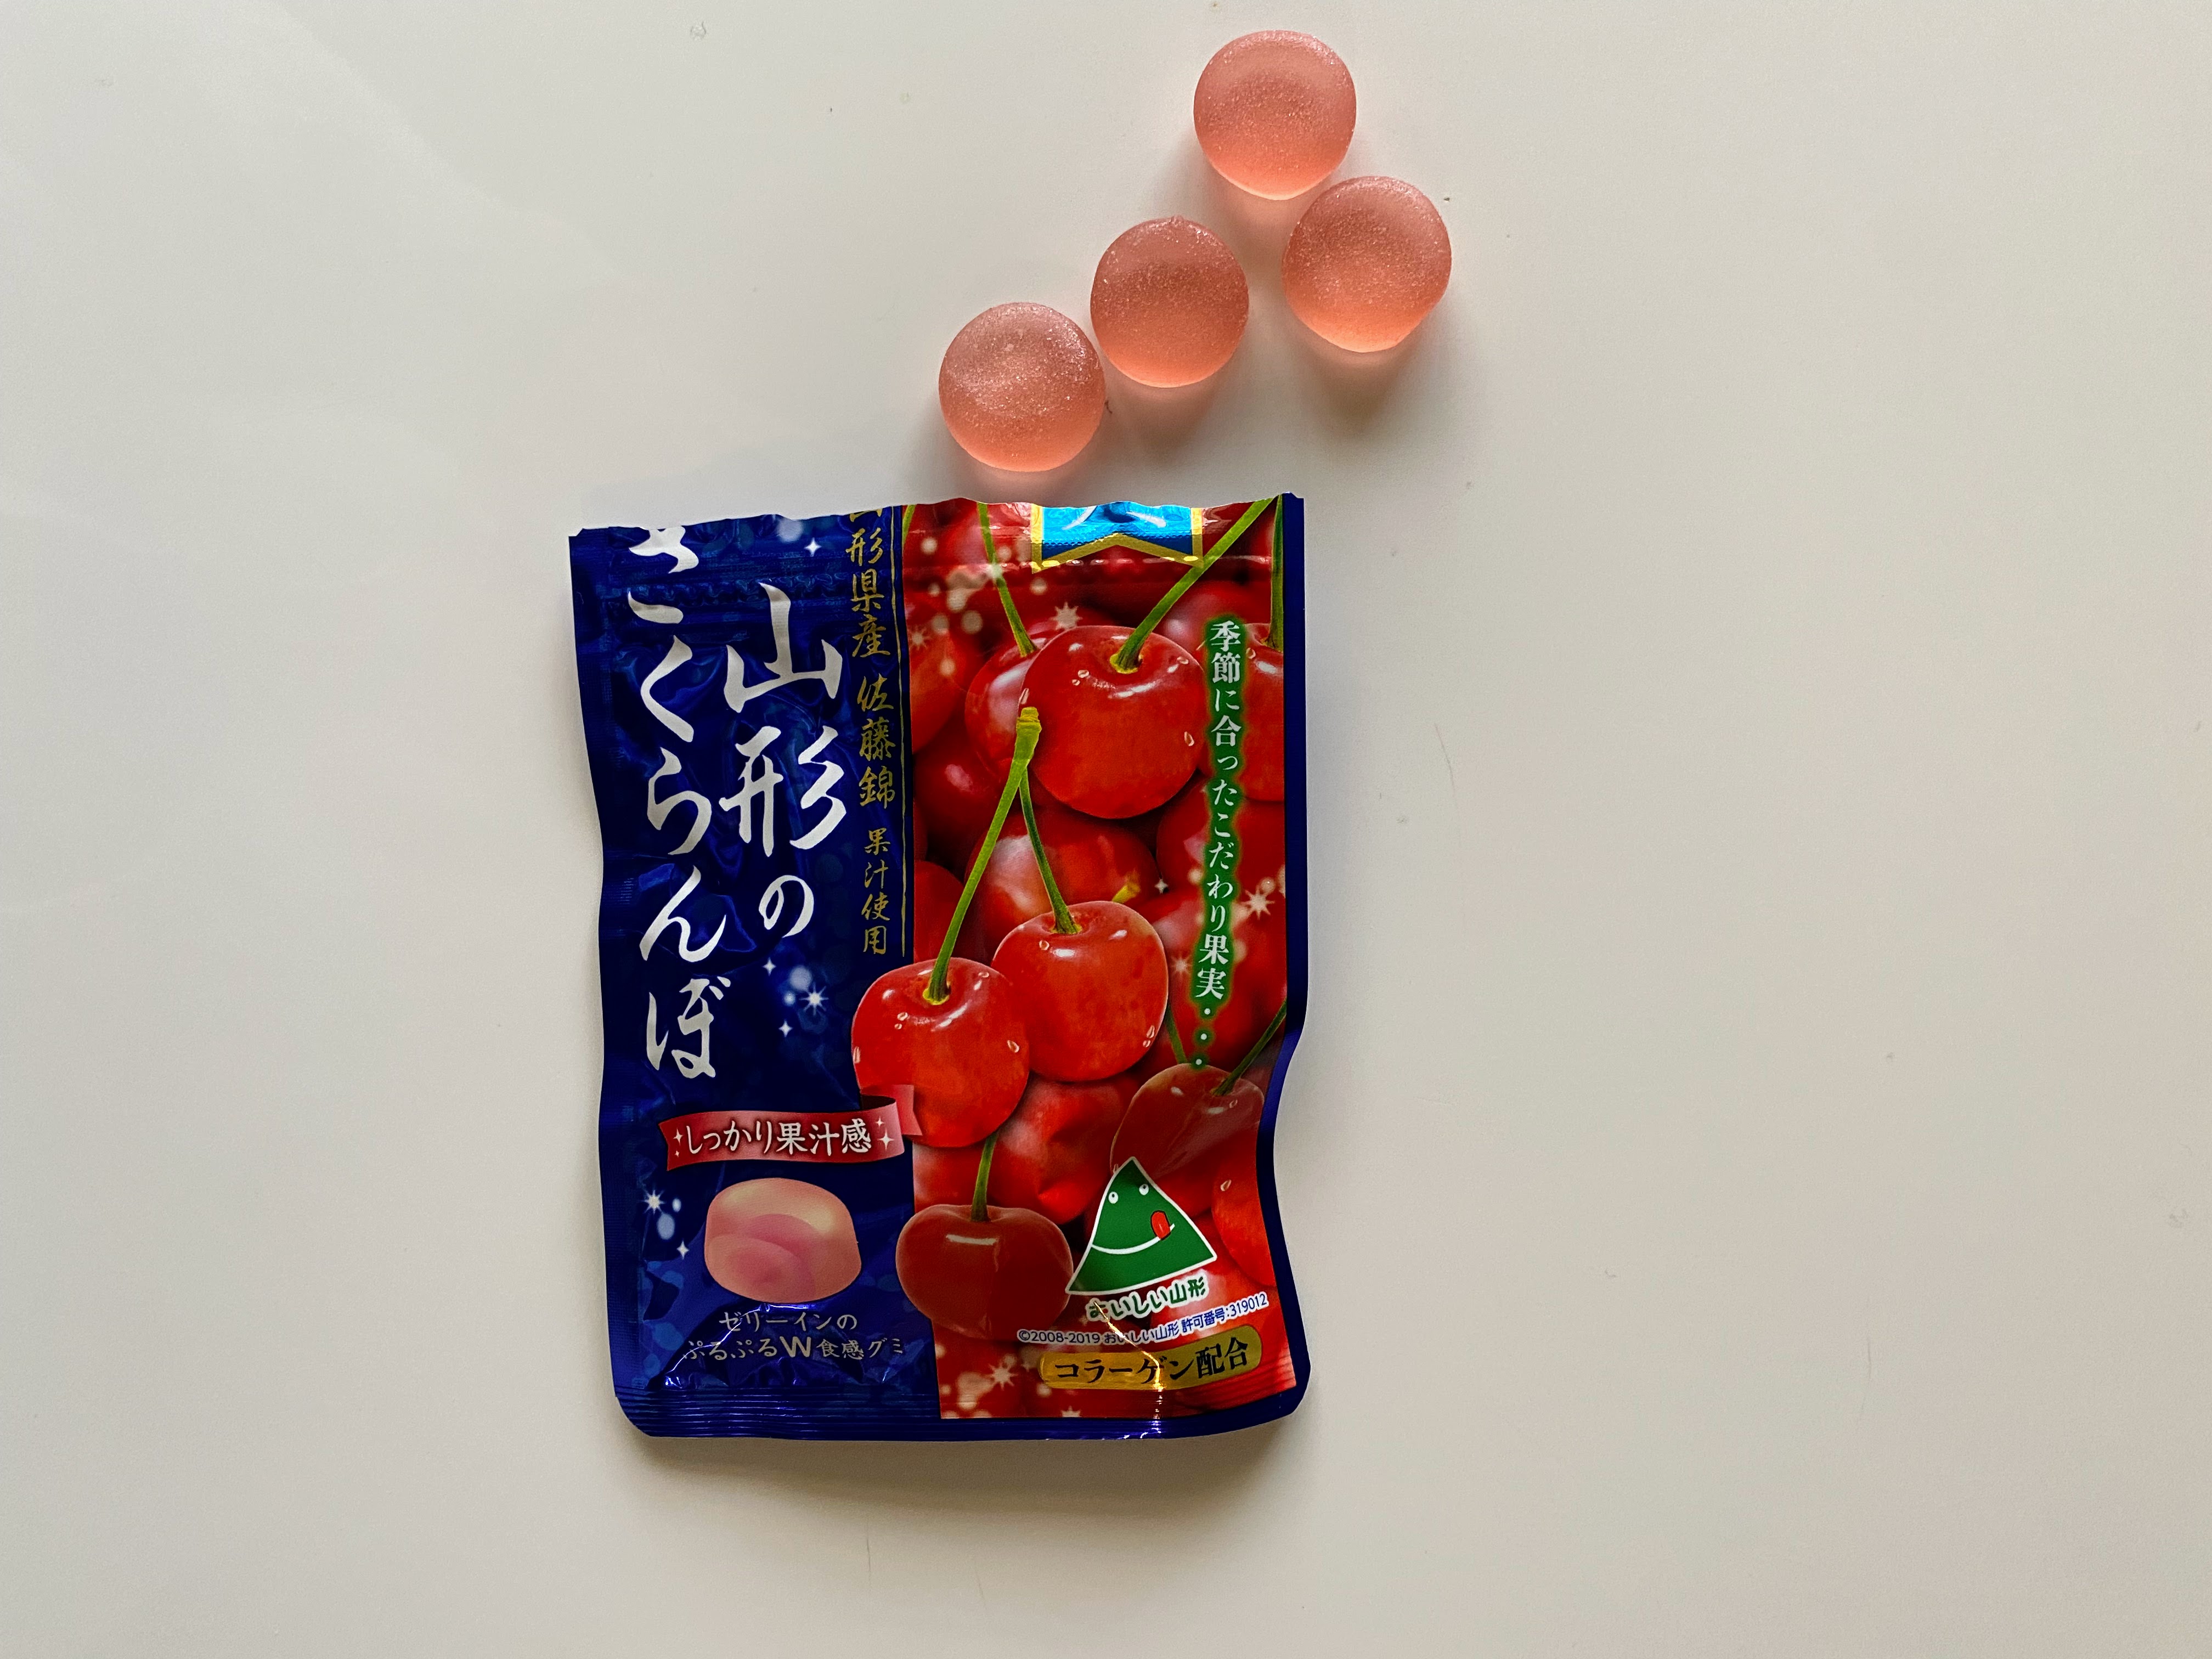 Opened Cherry Gummies from the Japan Crate July 2022